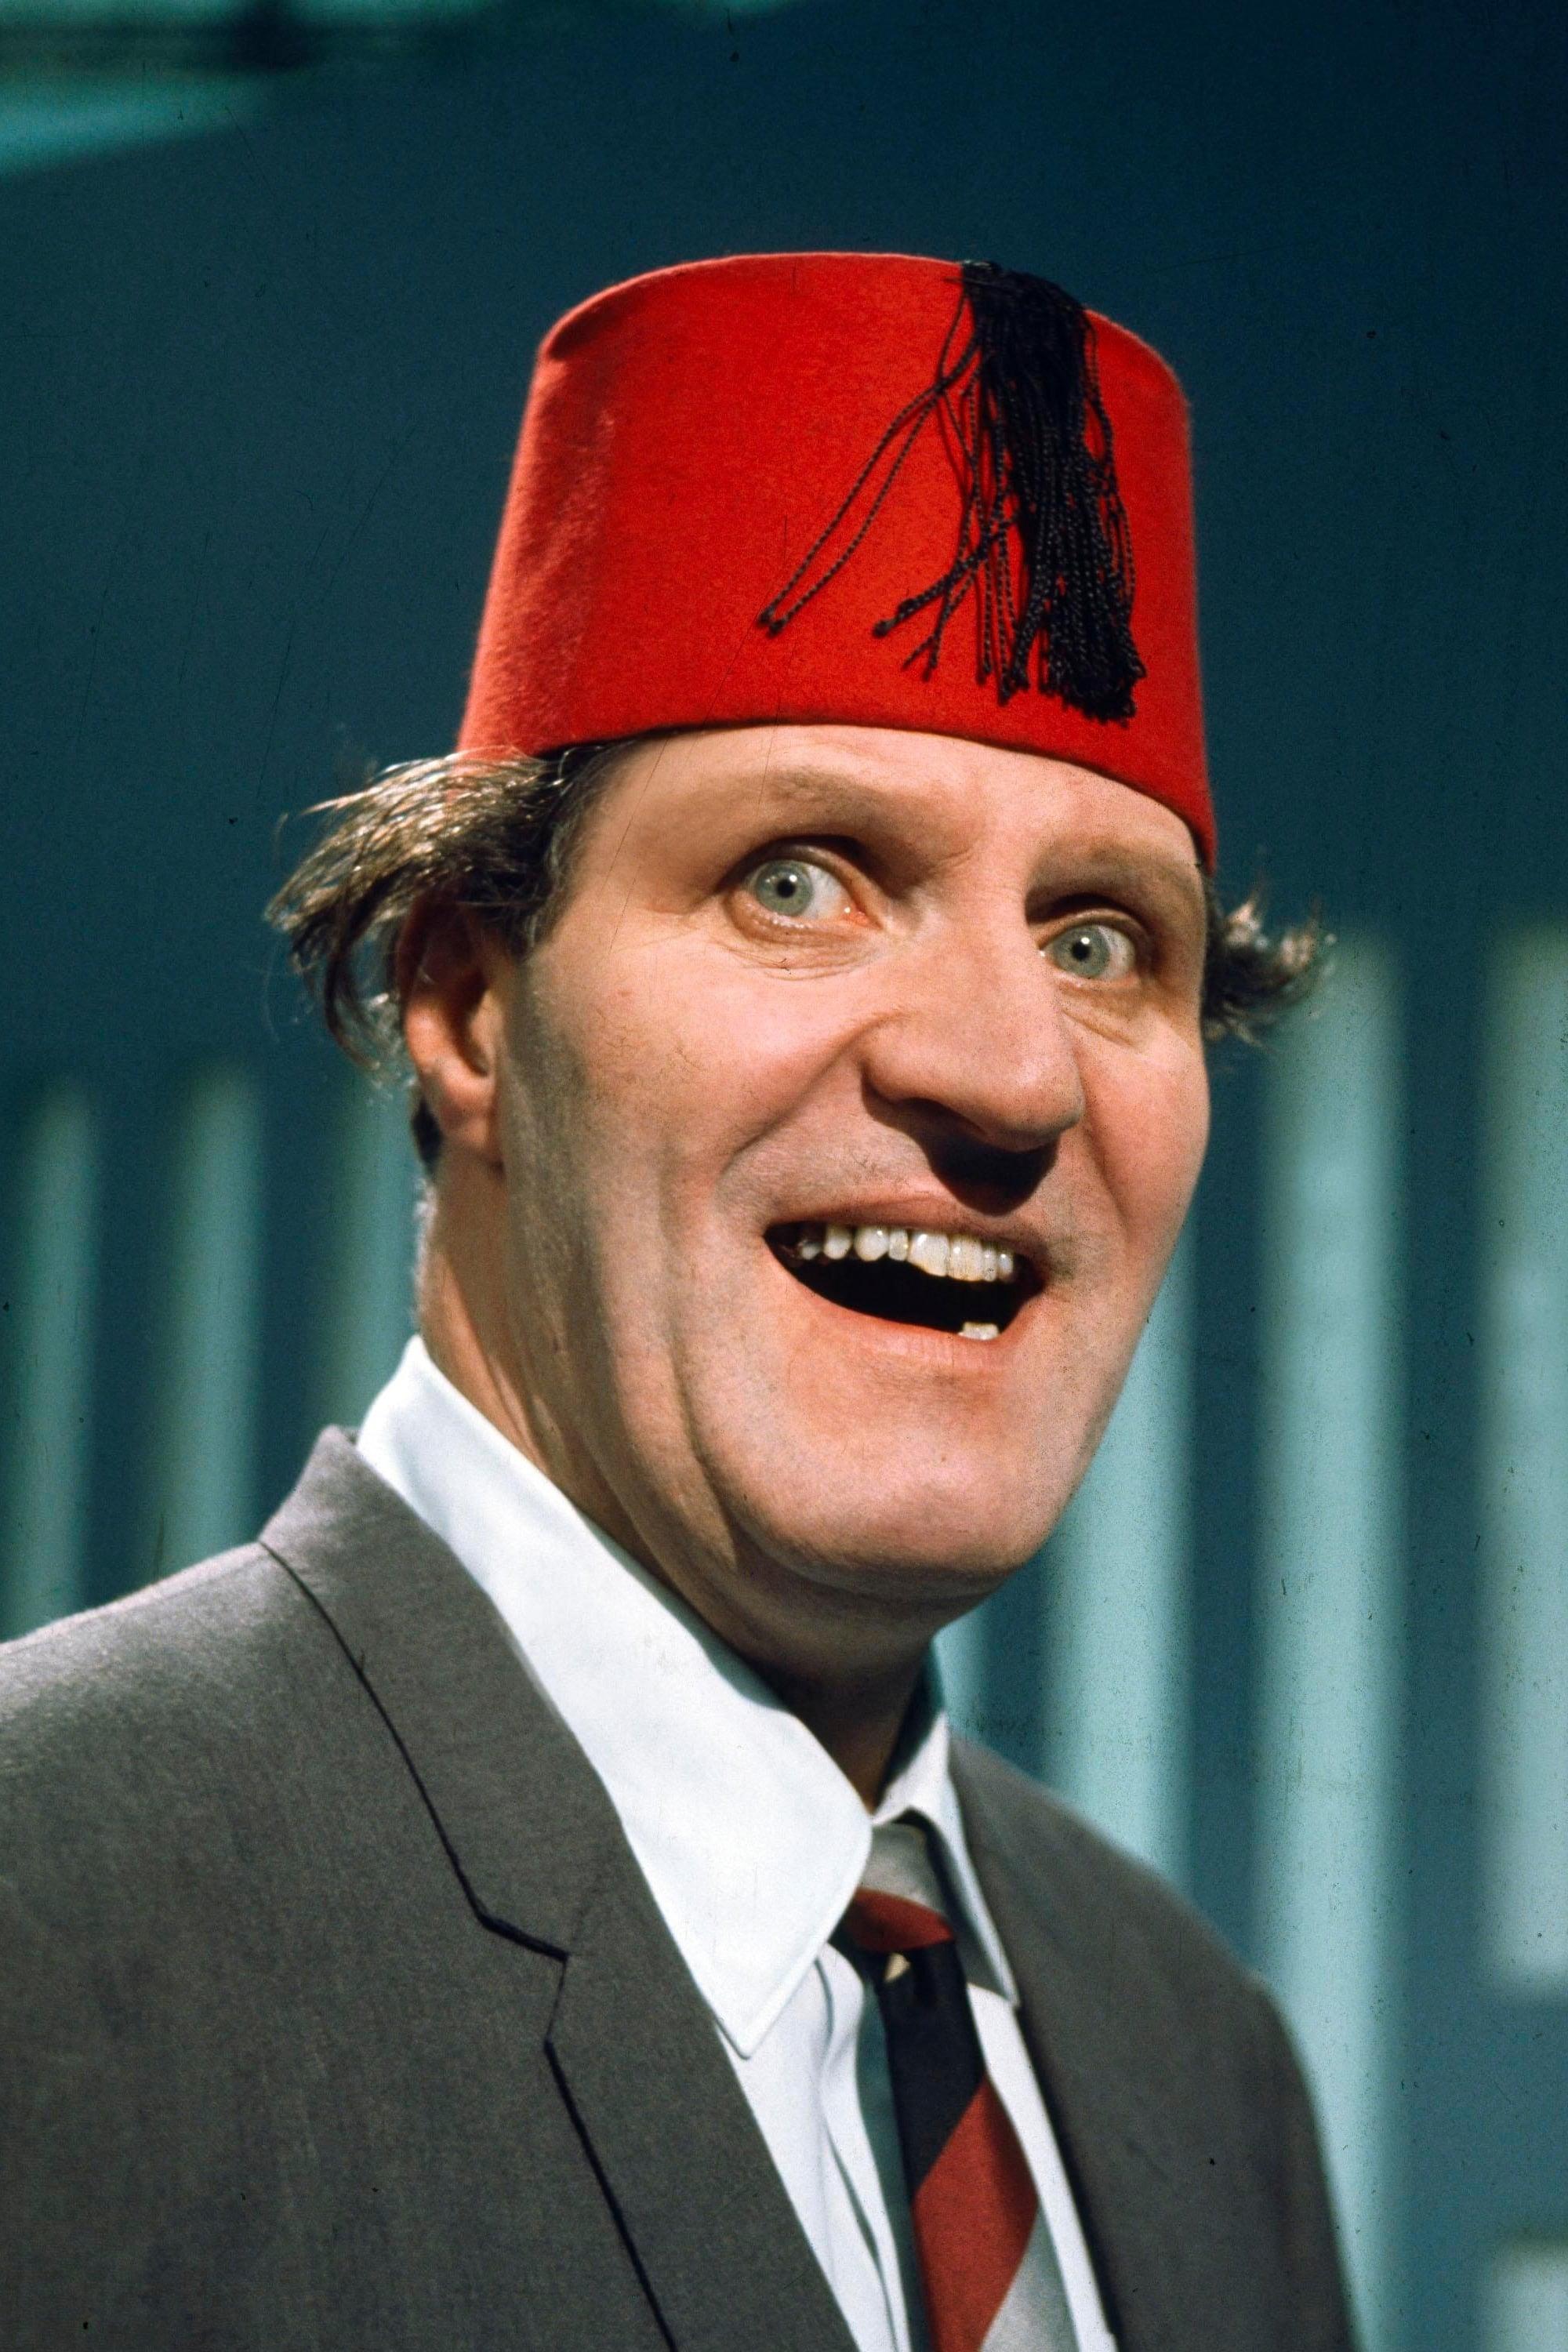 Tommy Cooper poster